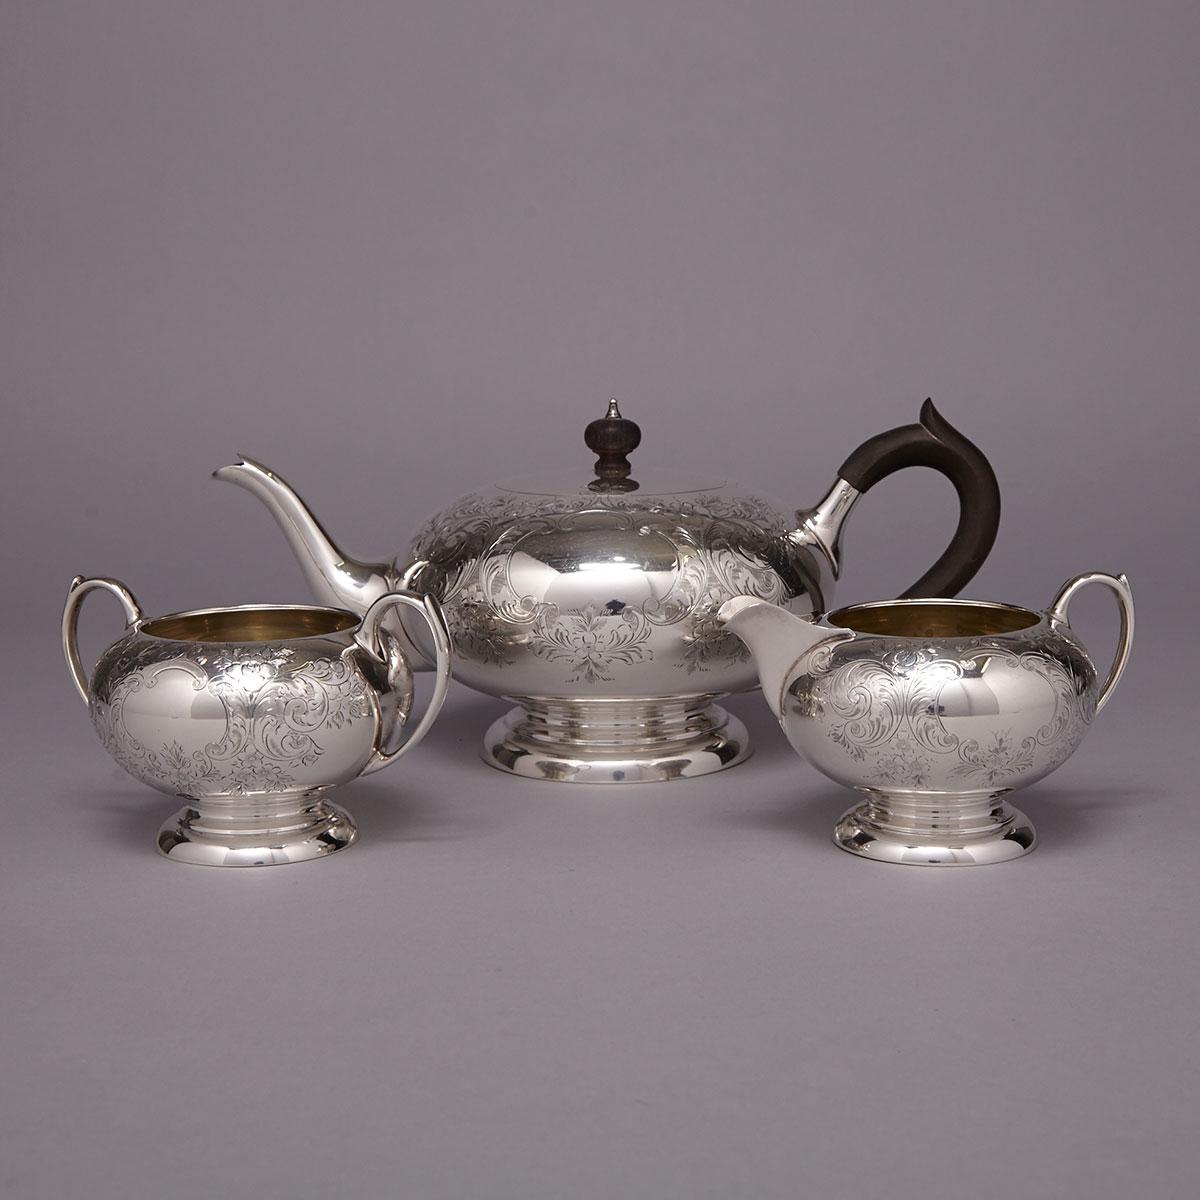 Canadian Silver Tea Service, Henry Birks & Sons, Montreal, Que., c.1920